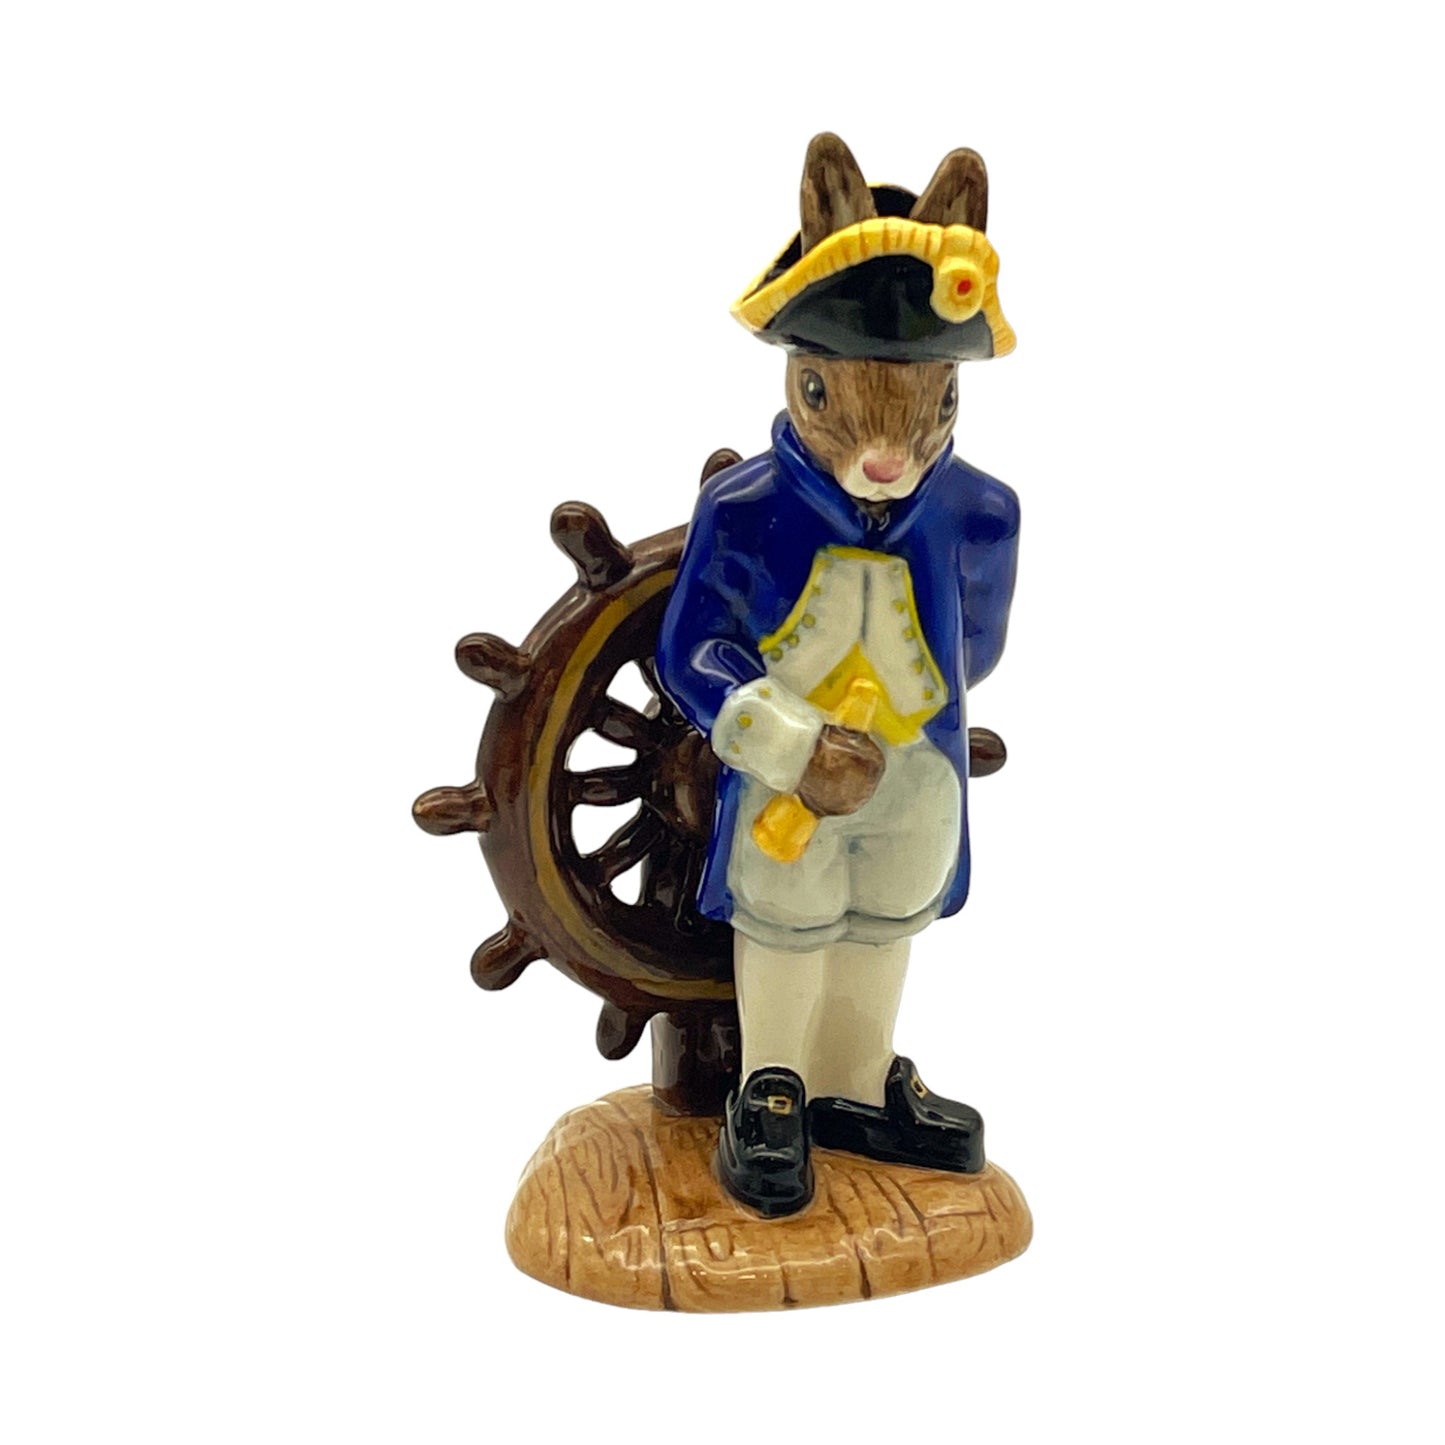 Royal Doulton Bunnykins - The Shipmates Collection Boatswain - Hand Made & Decorated - 2003  - 5"